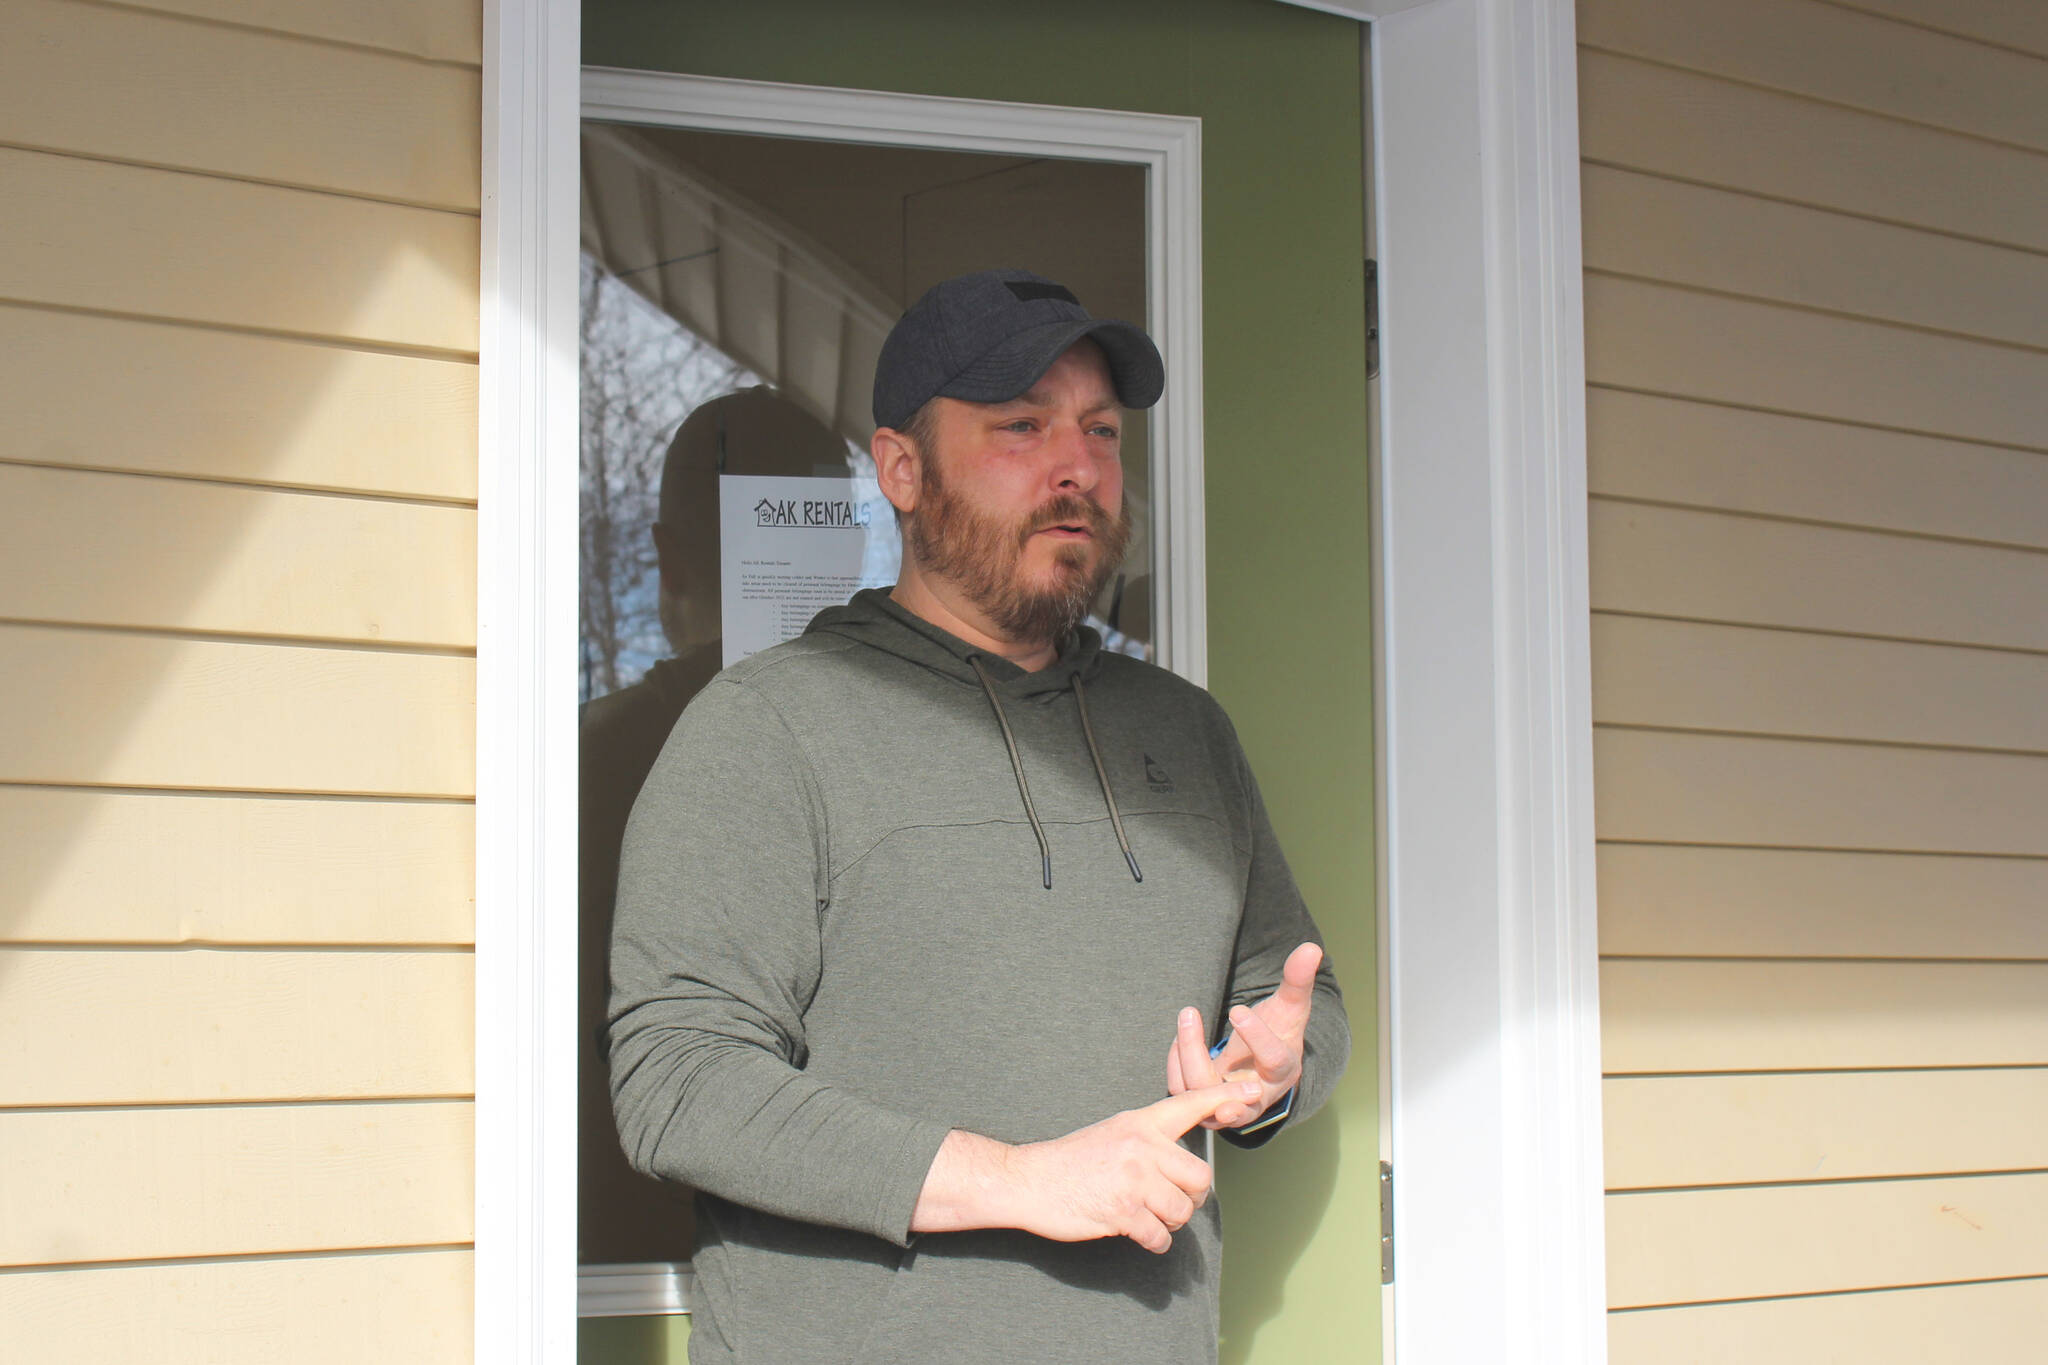 Tyson Cox speaks to potential tenants at one of his apartment buildings on Tuesday, March 22, 2022, in Soldotna, Alaska. (Ashlyn O’Hara/Peninsula Clarion)